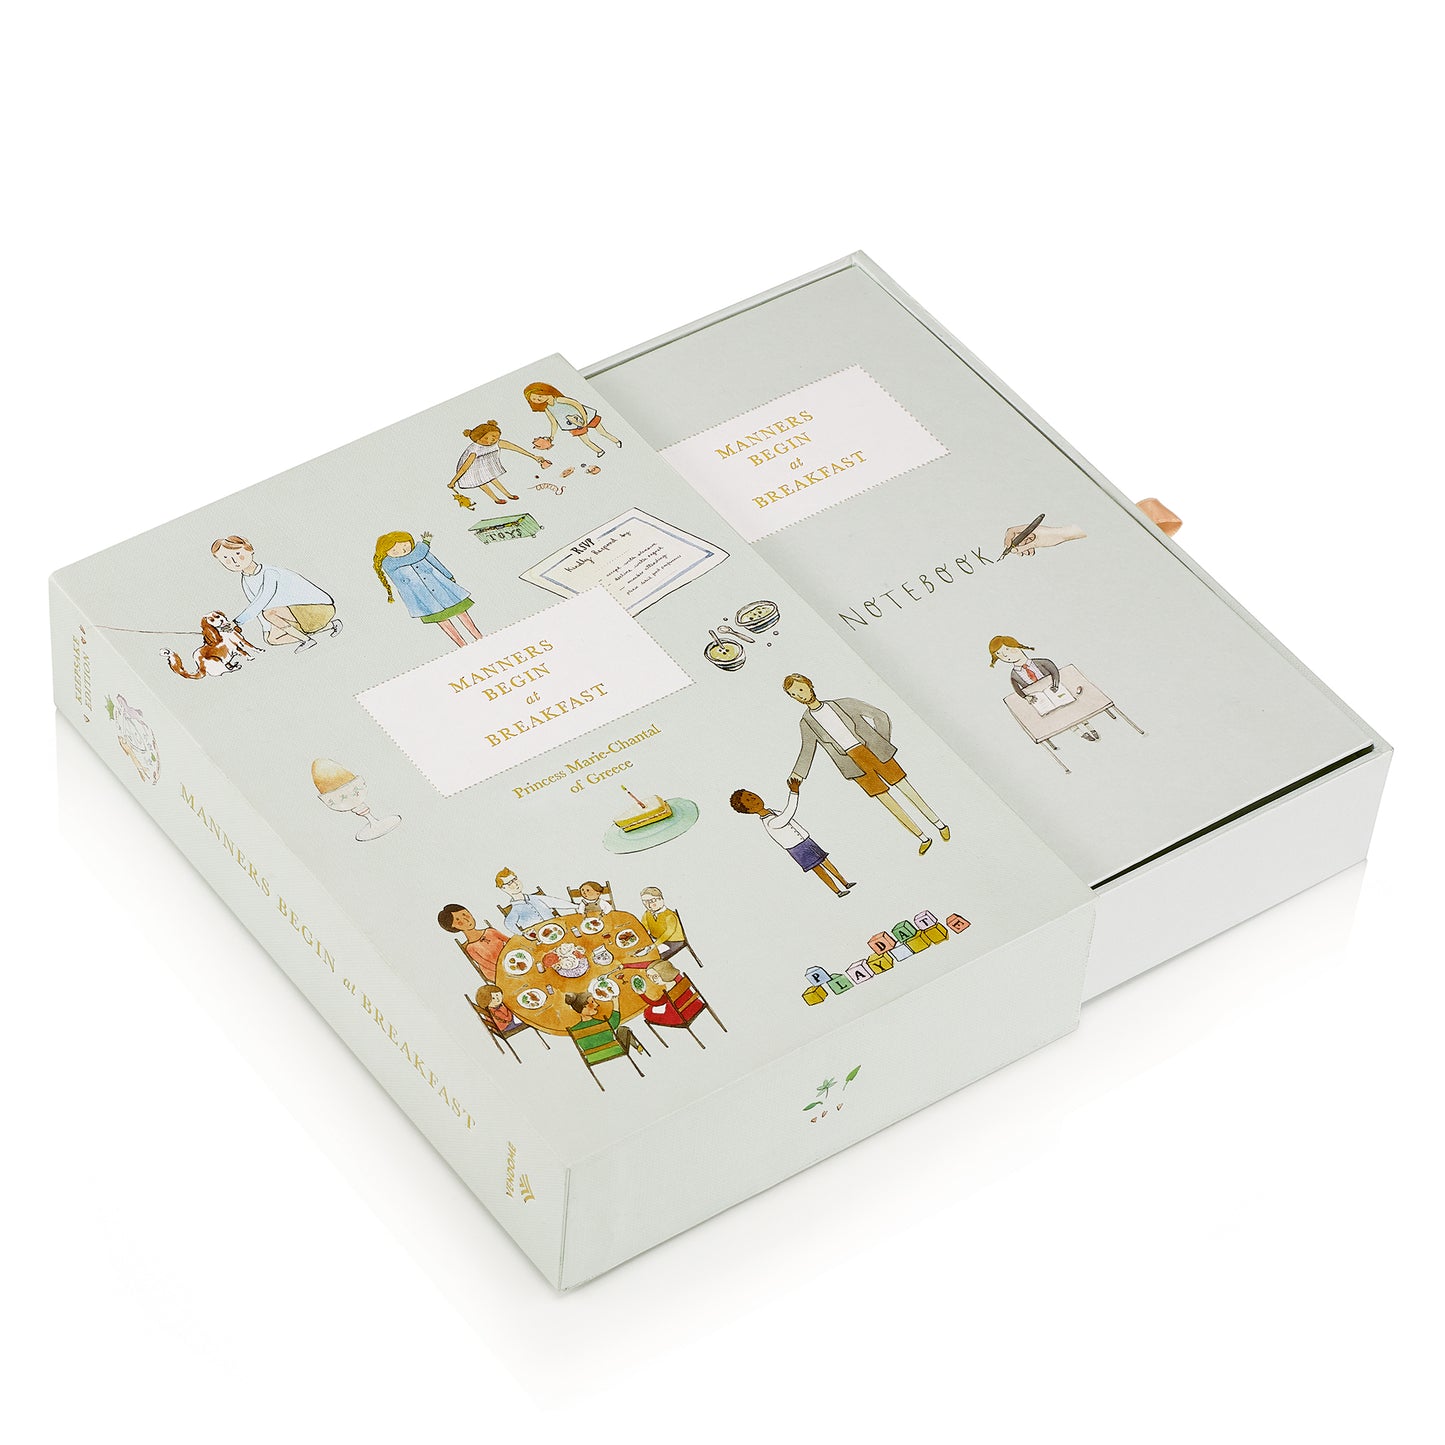 Manners Begin at Breakfast – Limited Edition – Signature Edition